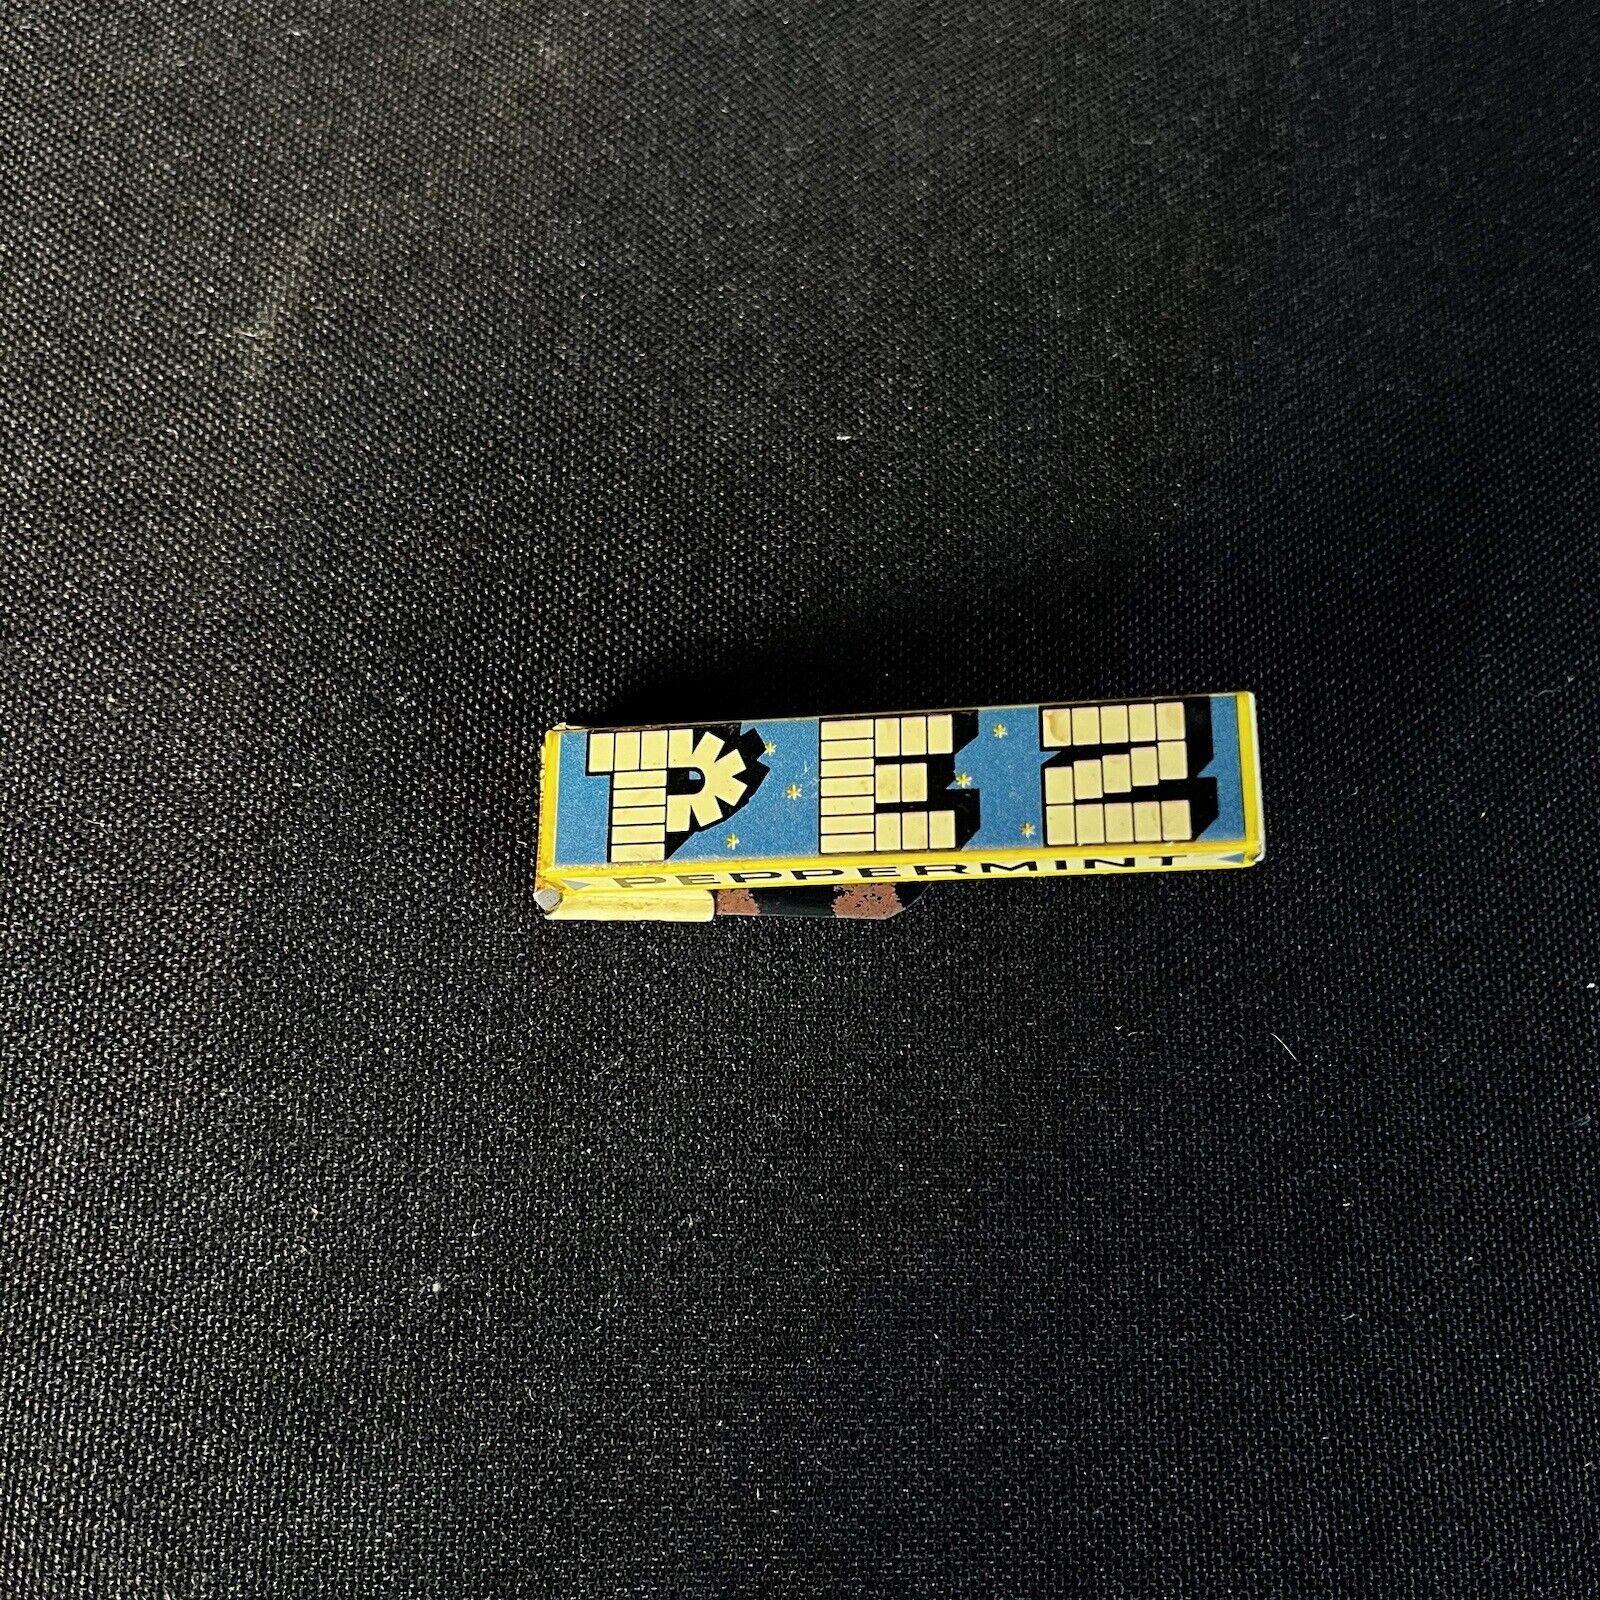 PEZ VINTAGE Peppermint Candy Clicker advertising Tin Toy Litho